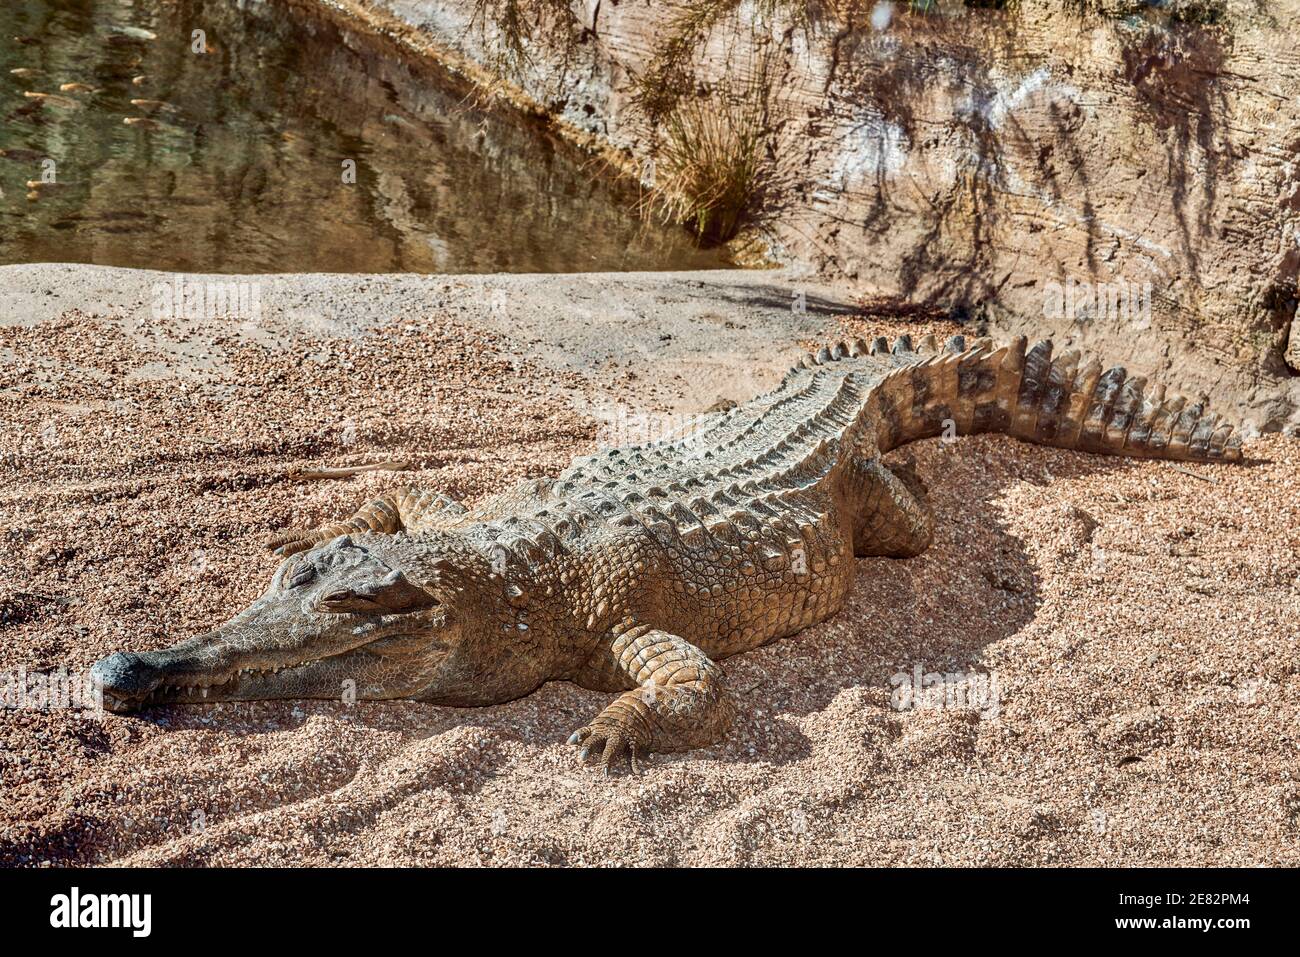 Crocodylidae is a family of sauropsids, archosaurs commonly known as crocodiles in the Oceanografico of the city of Valencia, Spain Stock Photo